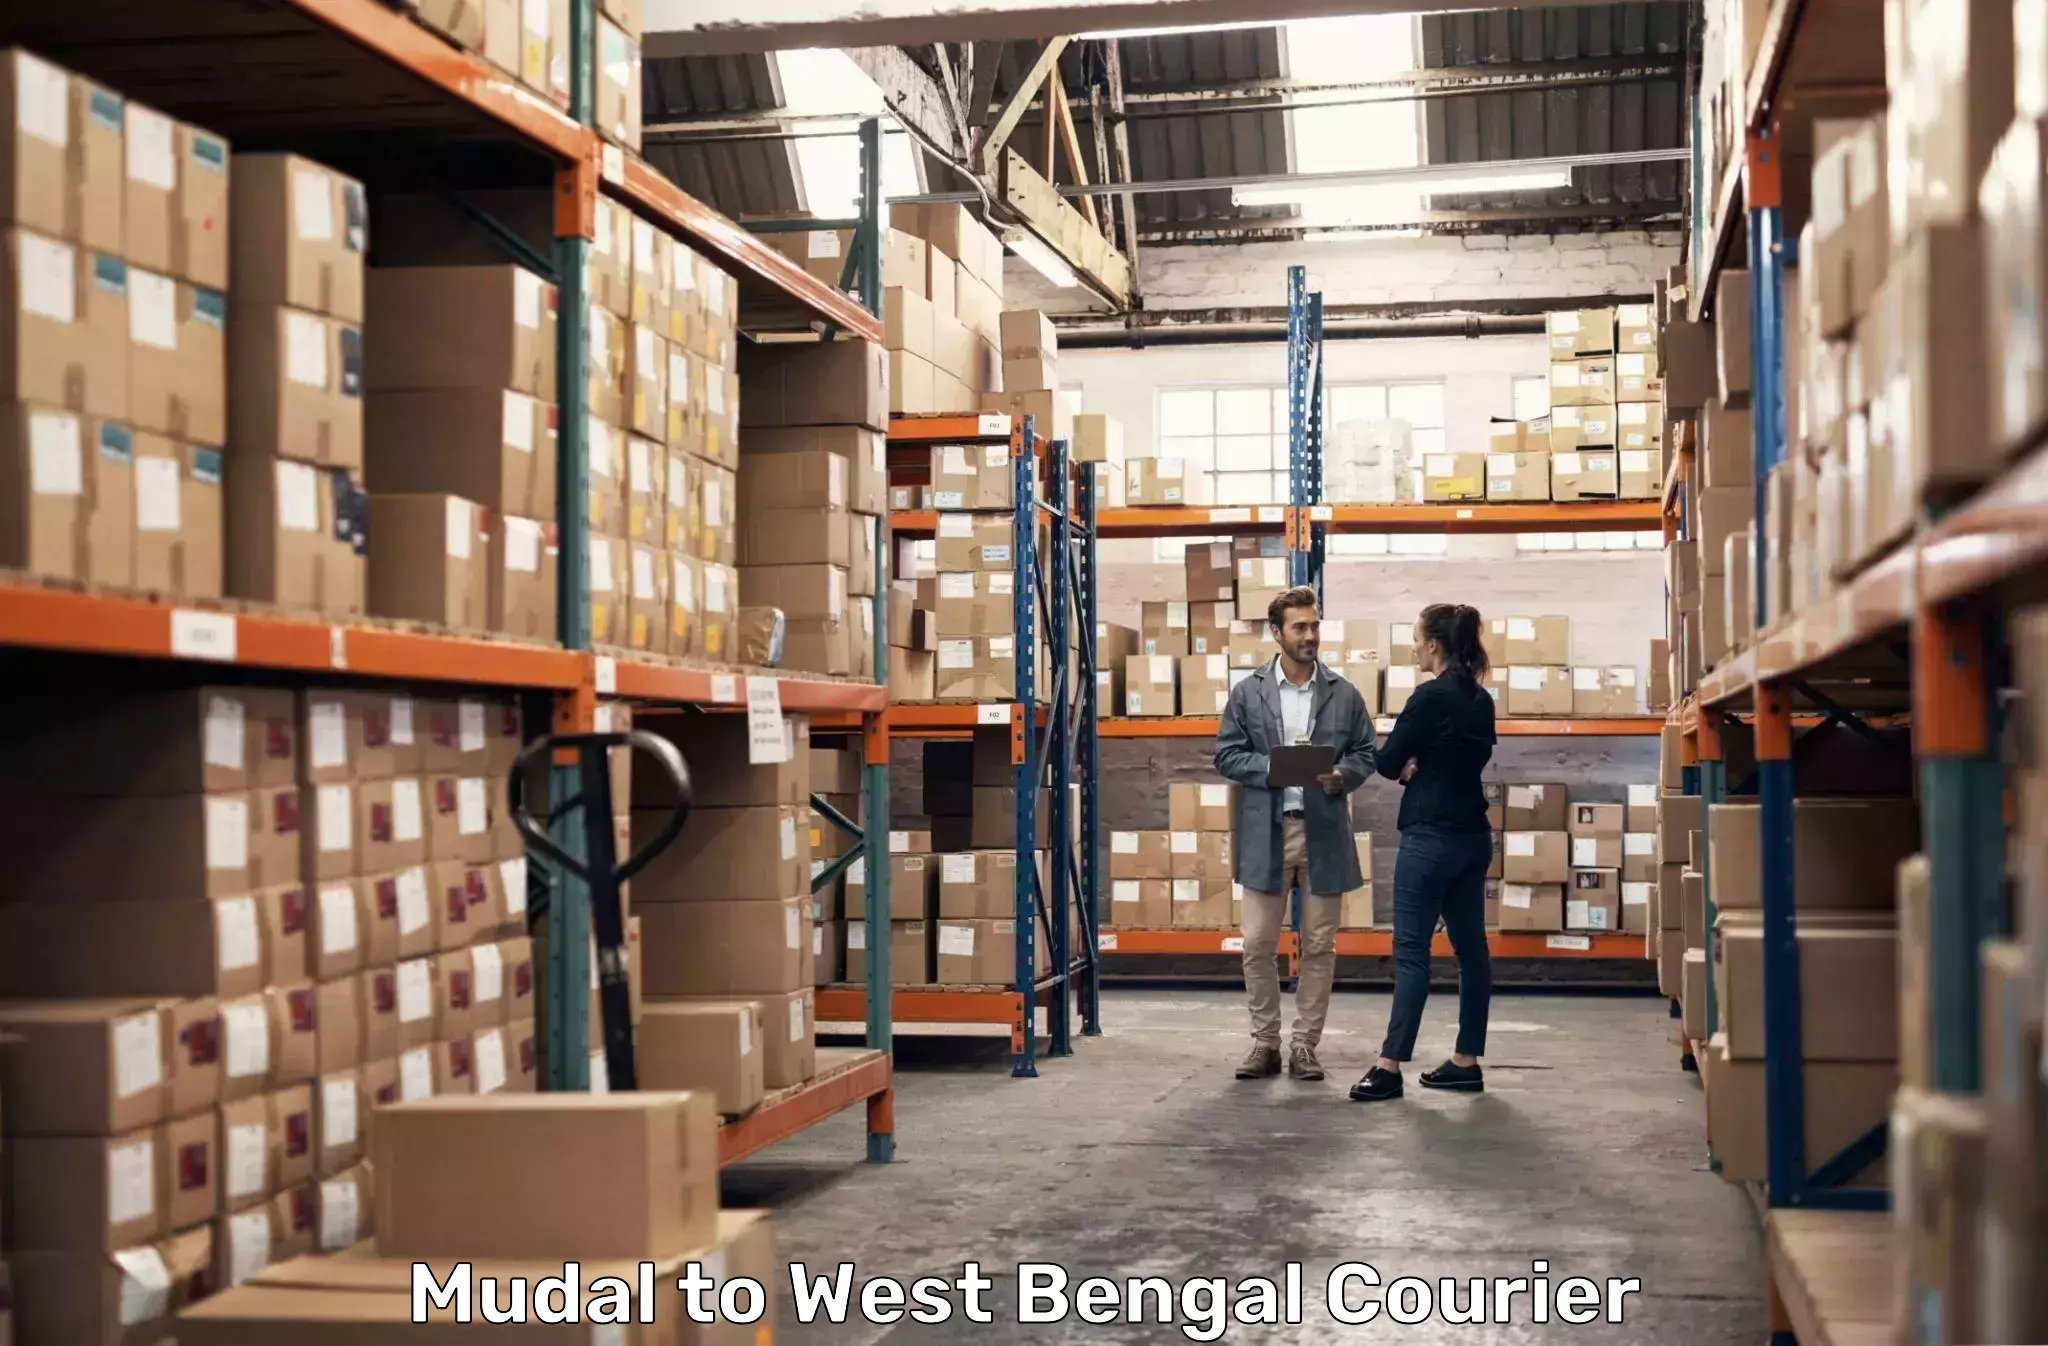 Urban courier service Mudal to West Bengal